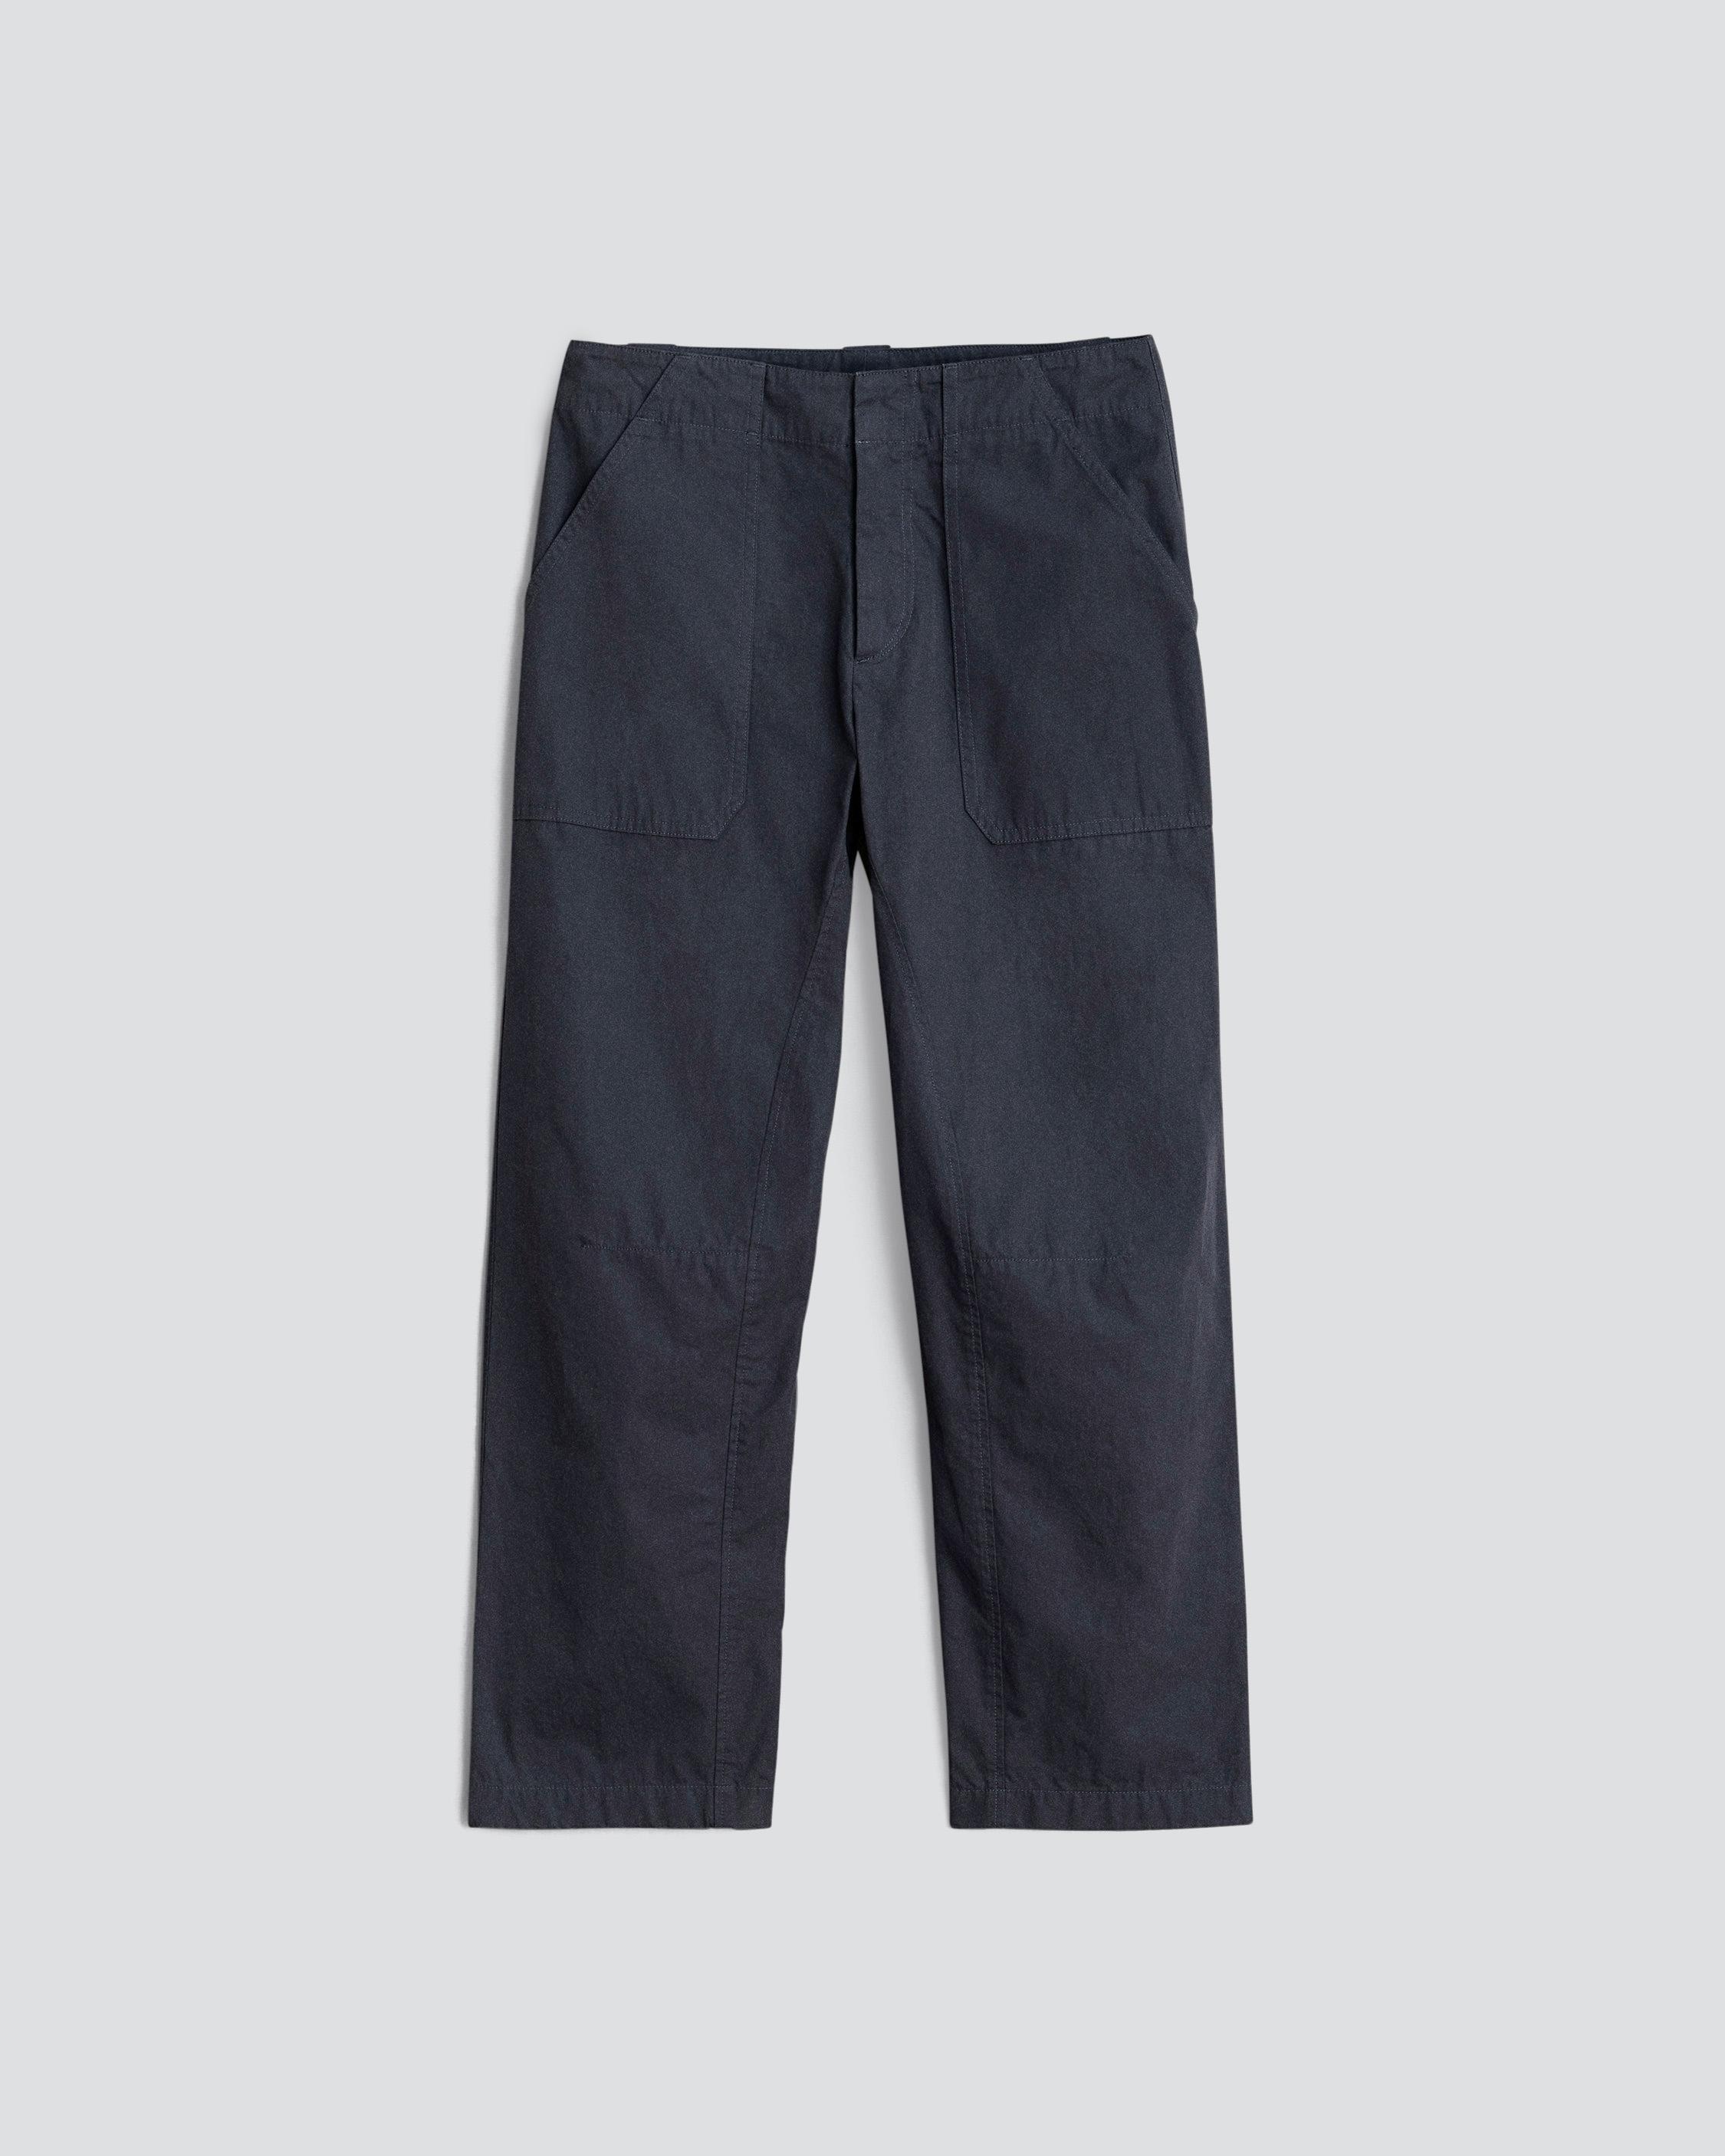 Leyton Workwear Cotton Pant
Relaxed Fit - 1